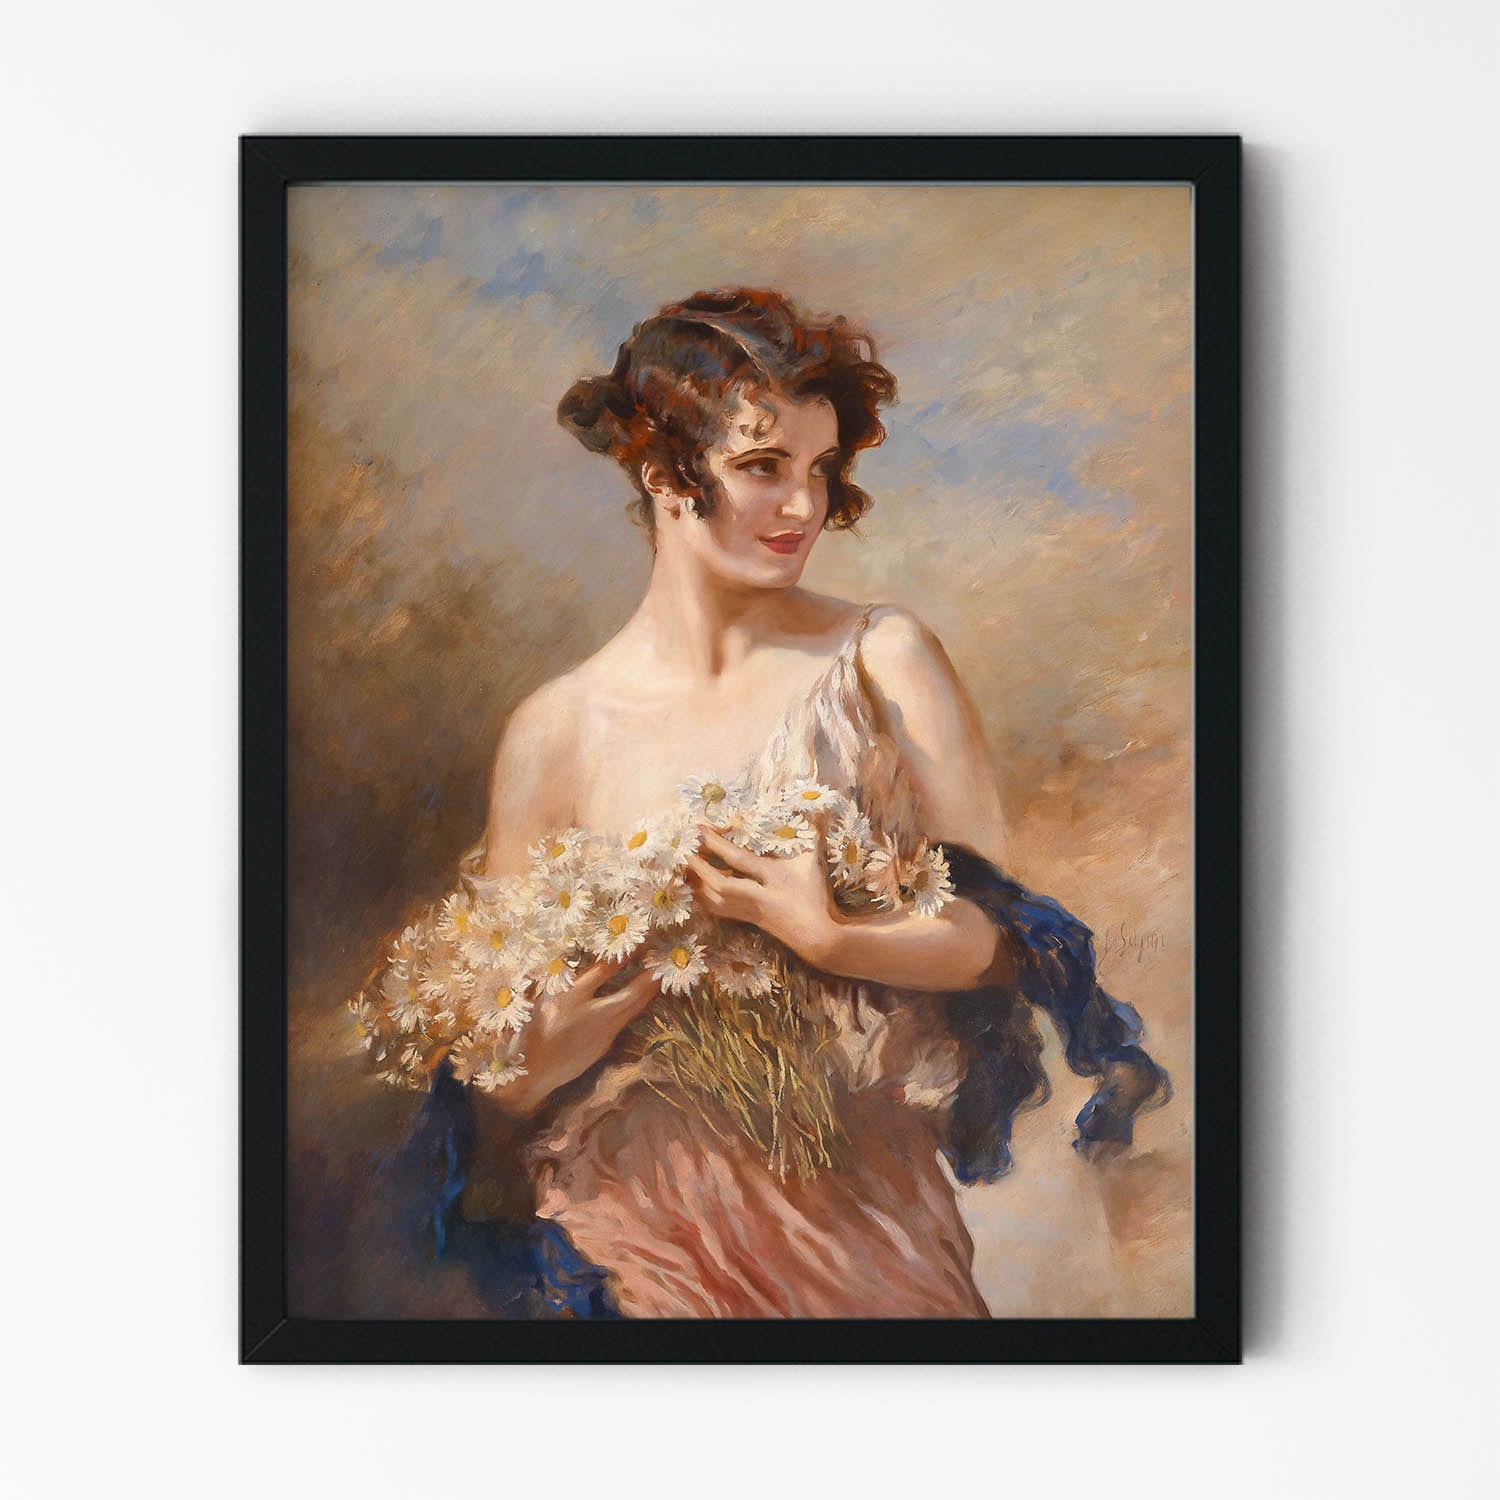 A Handfull of Flowers Art Print in Black Picture Frame